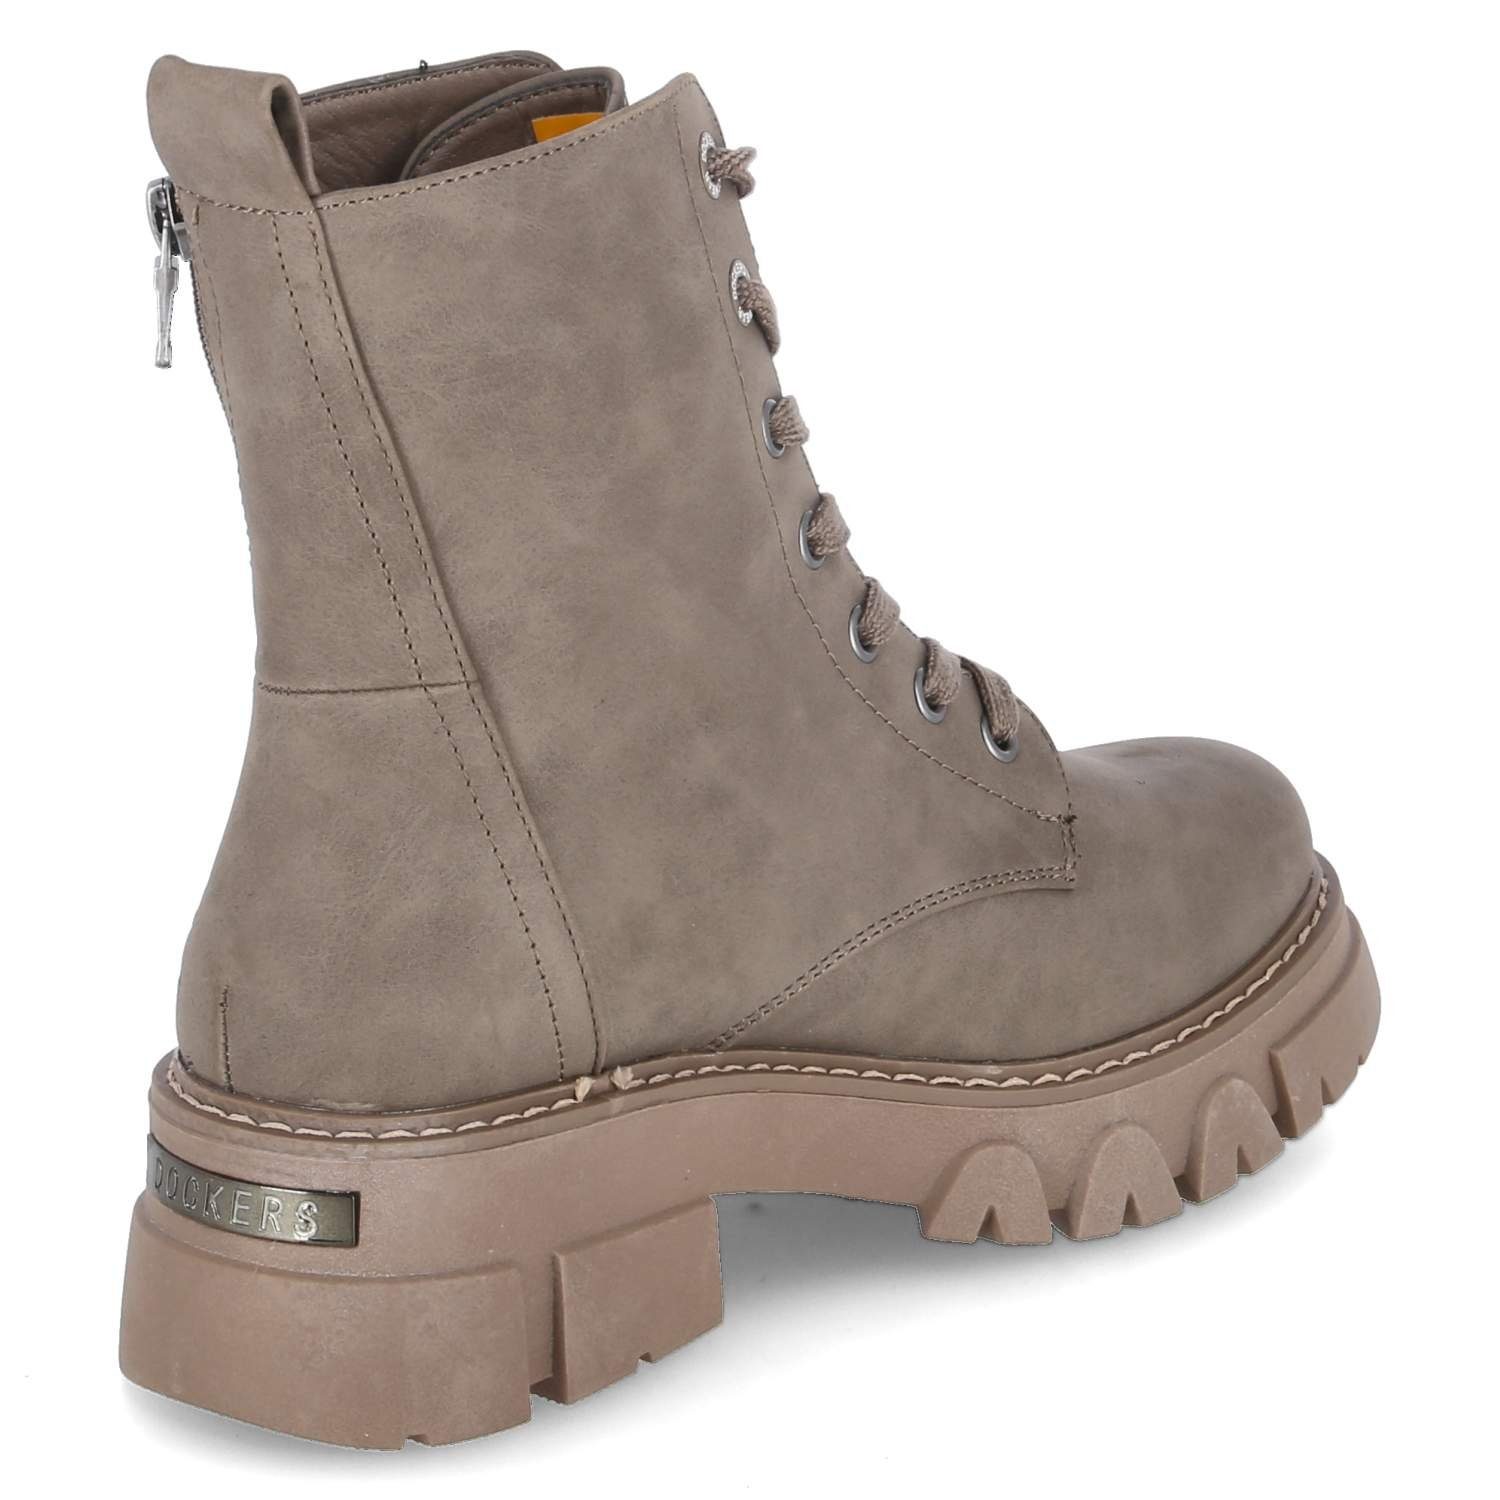 Dockers by Gerli Combat Schnürstiefel taupe 630430 Boots